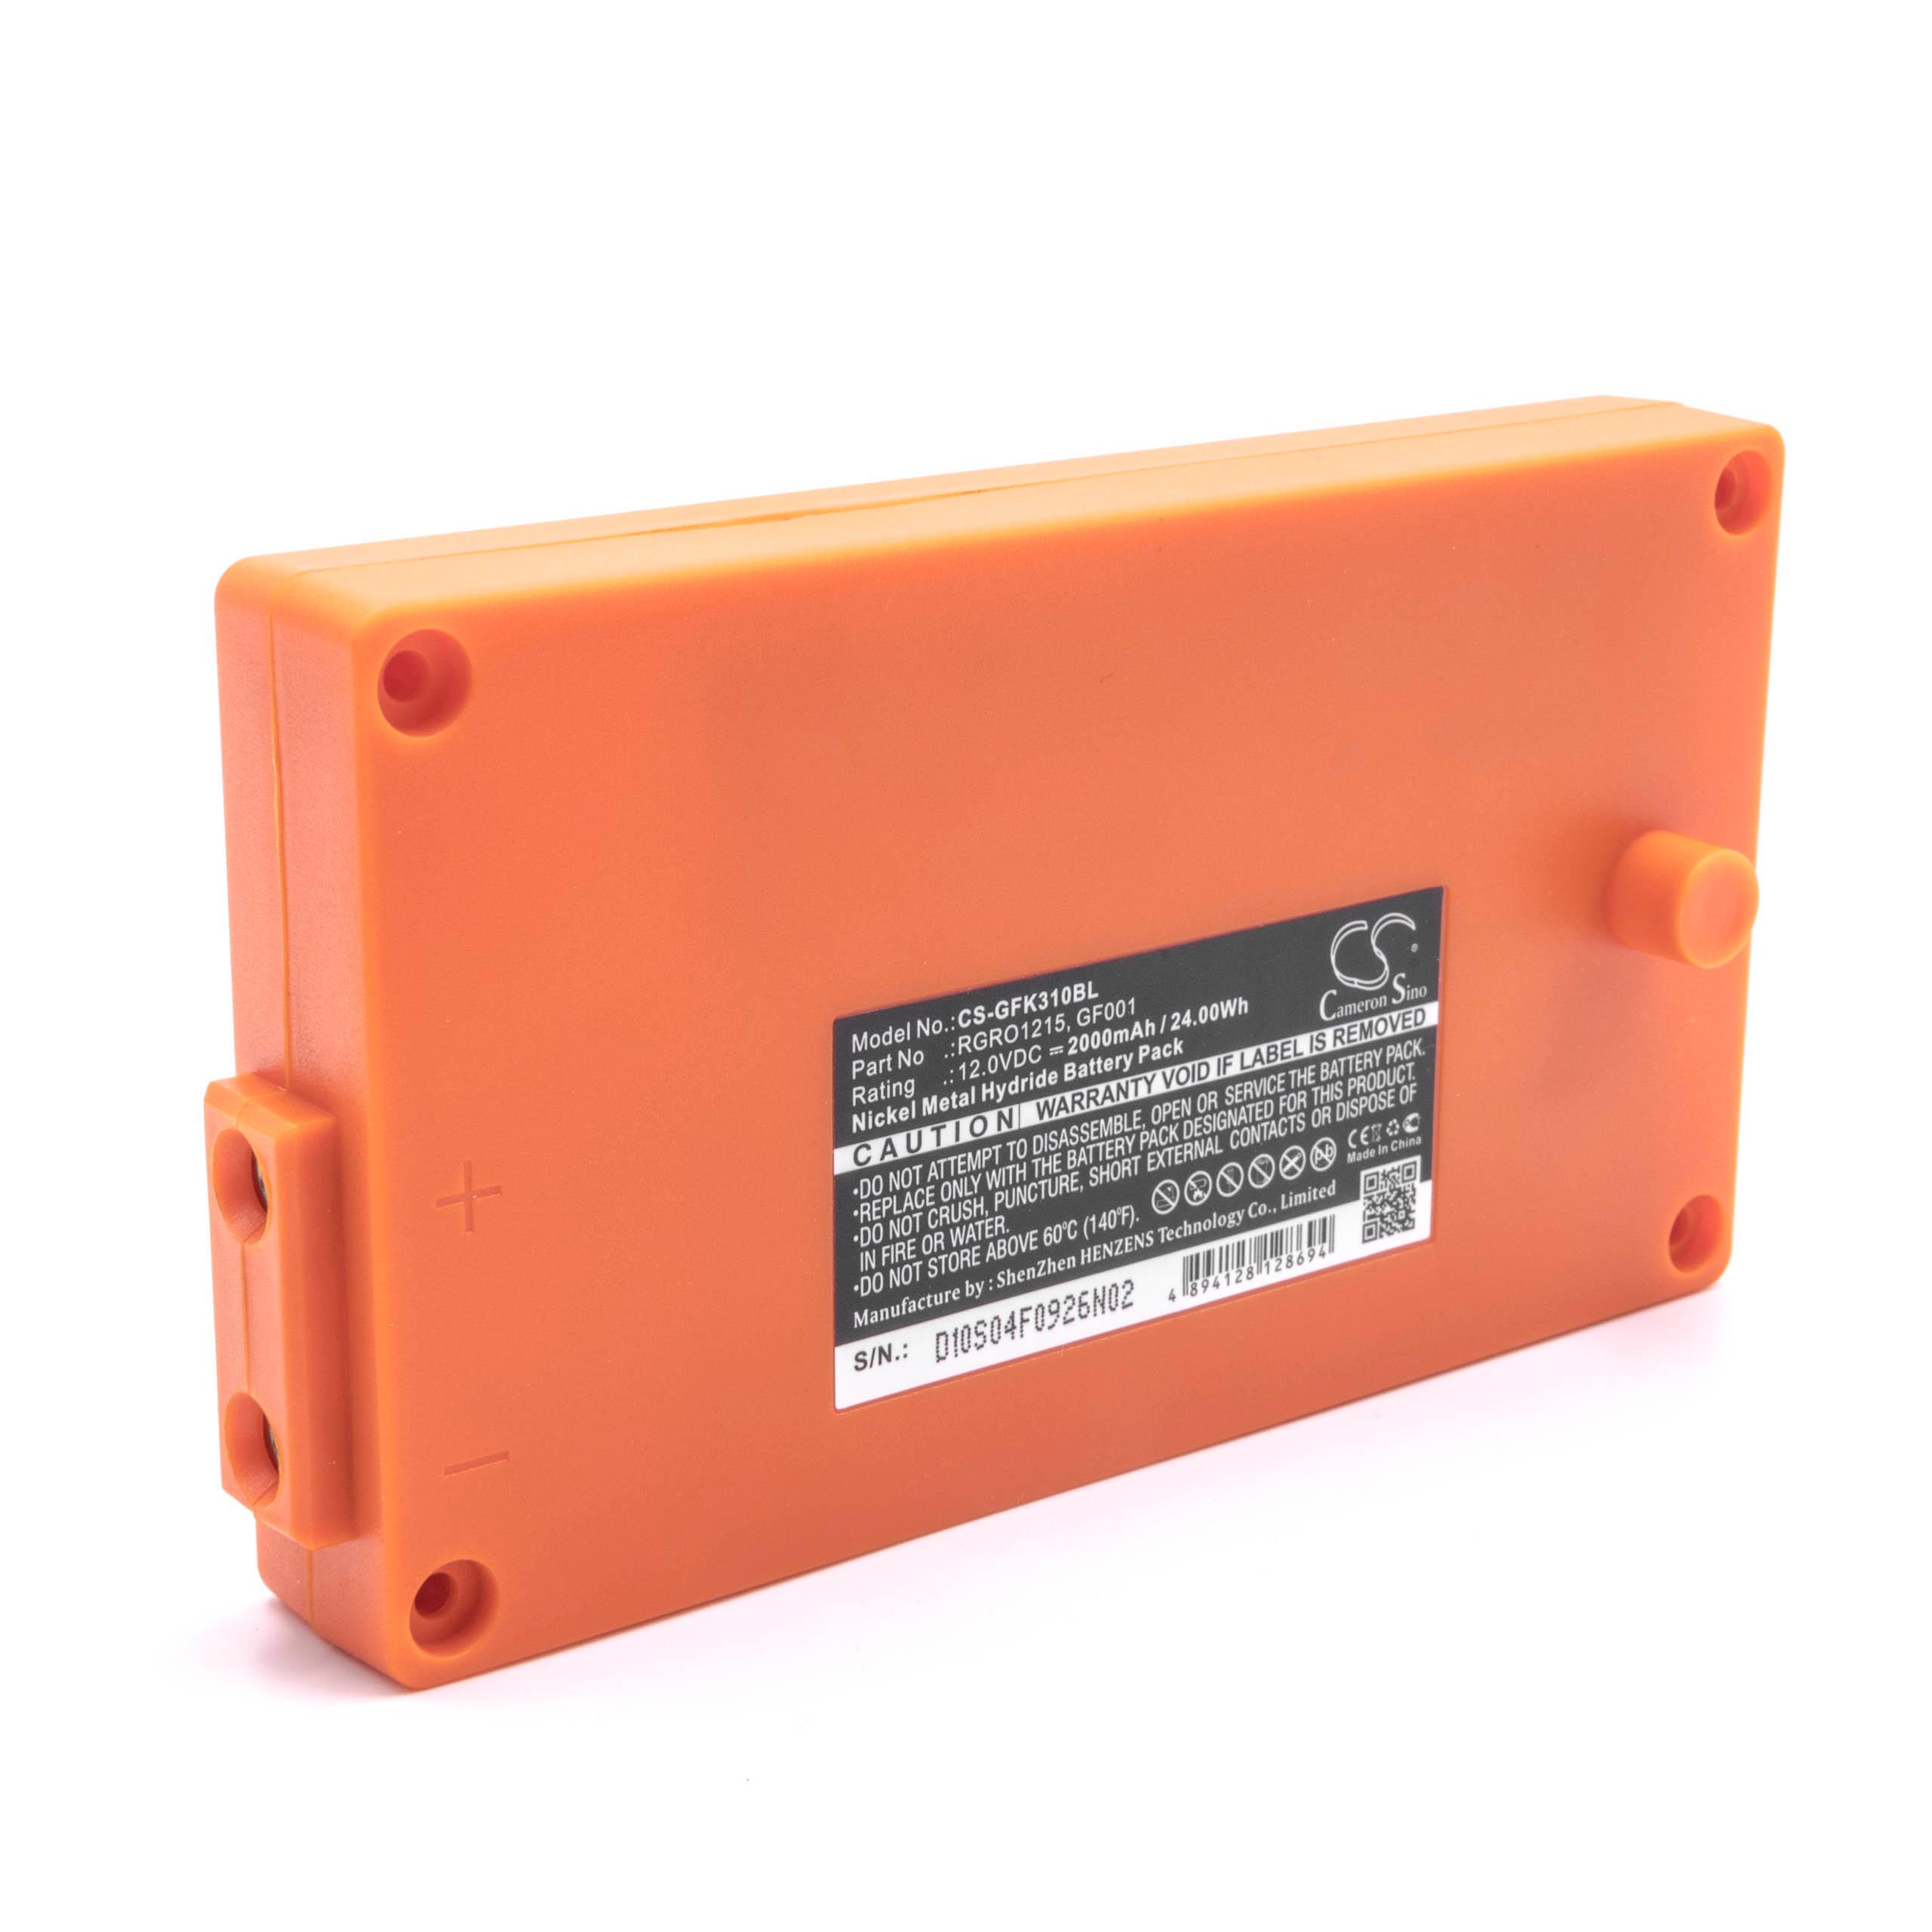 Industrial Remote Control Battery Replacement for Gross Funk GF001, 738010957, 100-000-134 - 2000mAh 12V NiMH